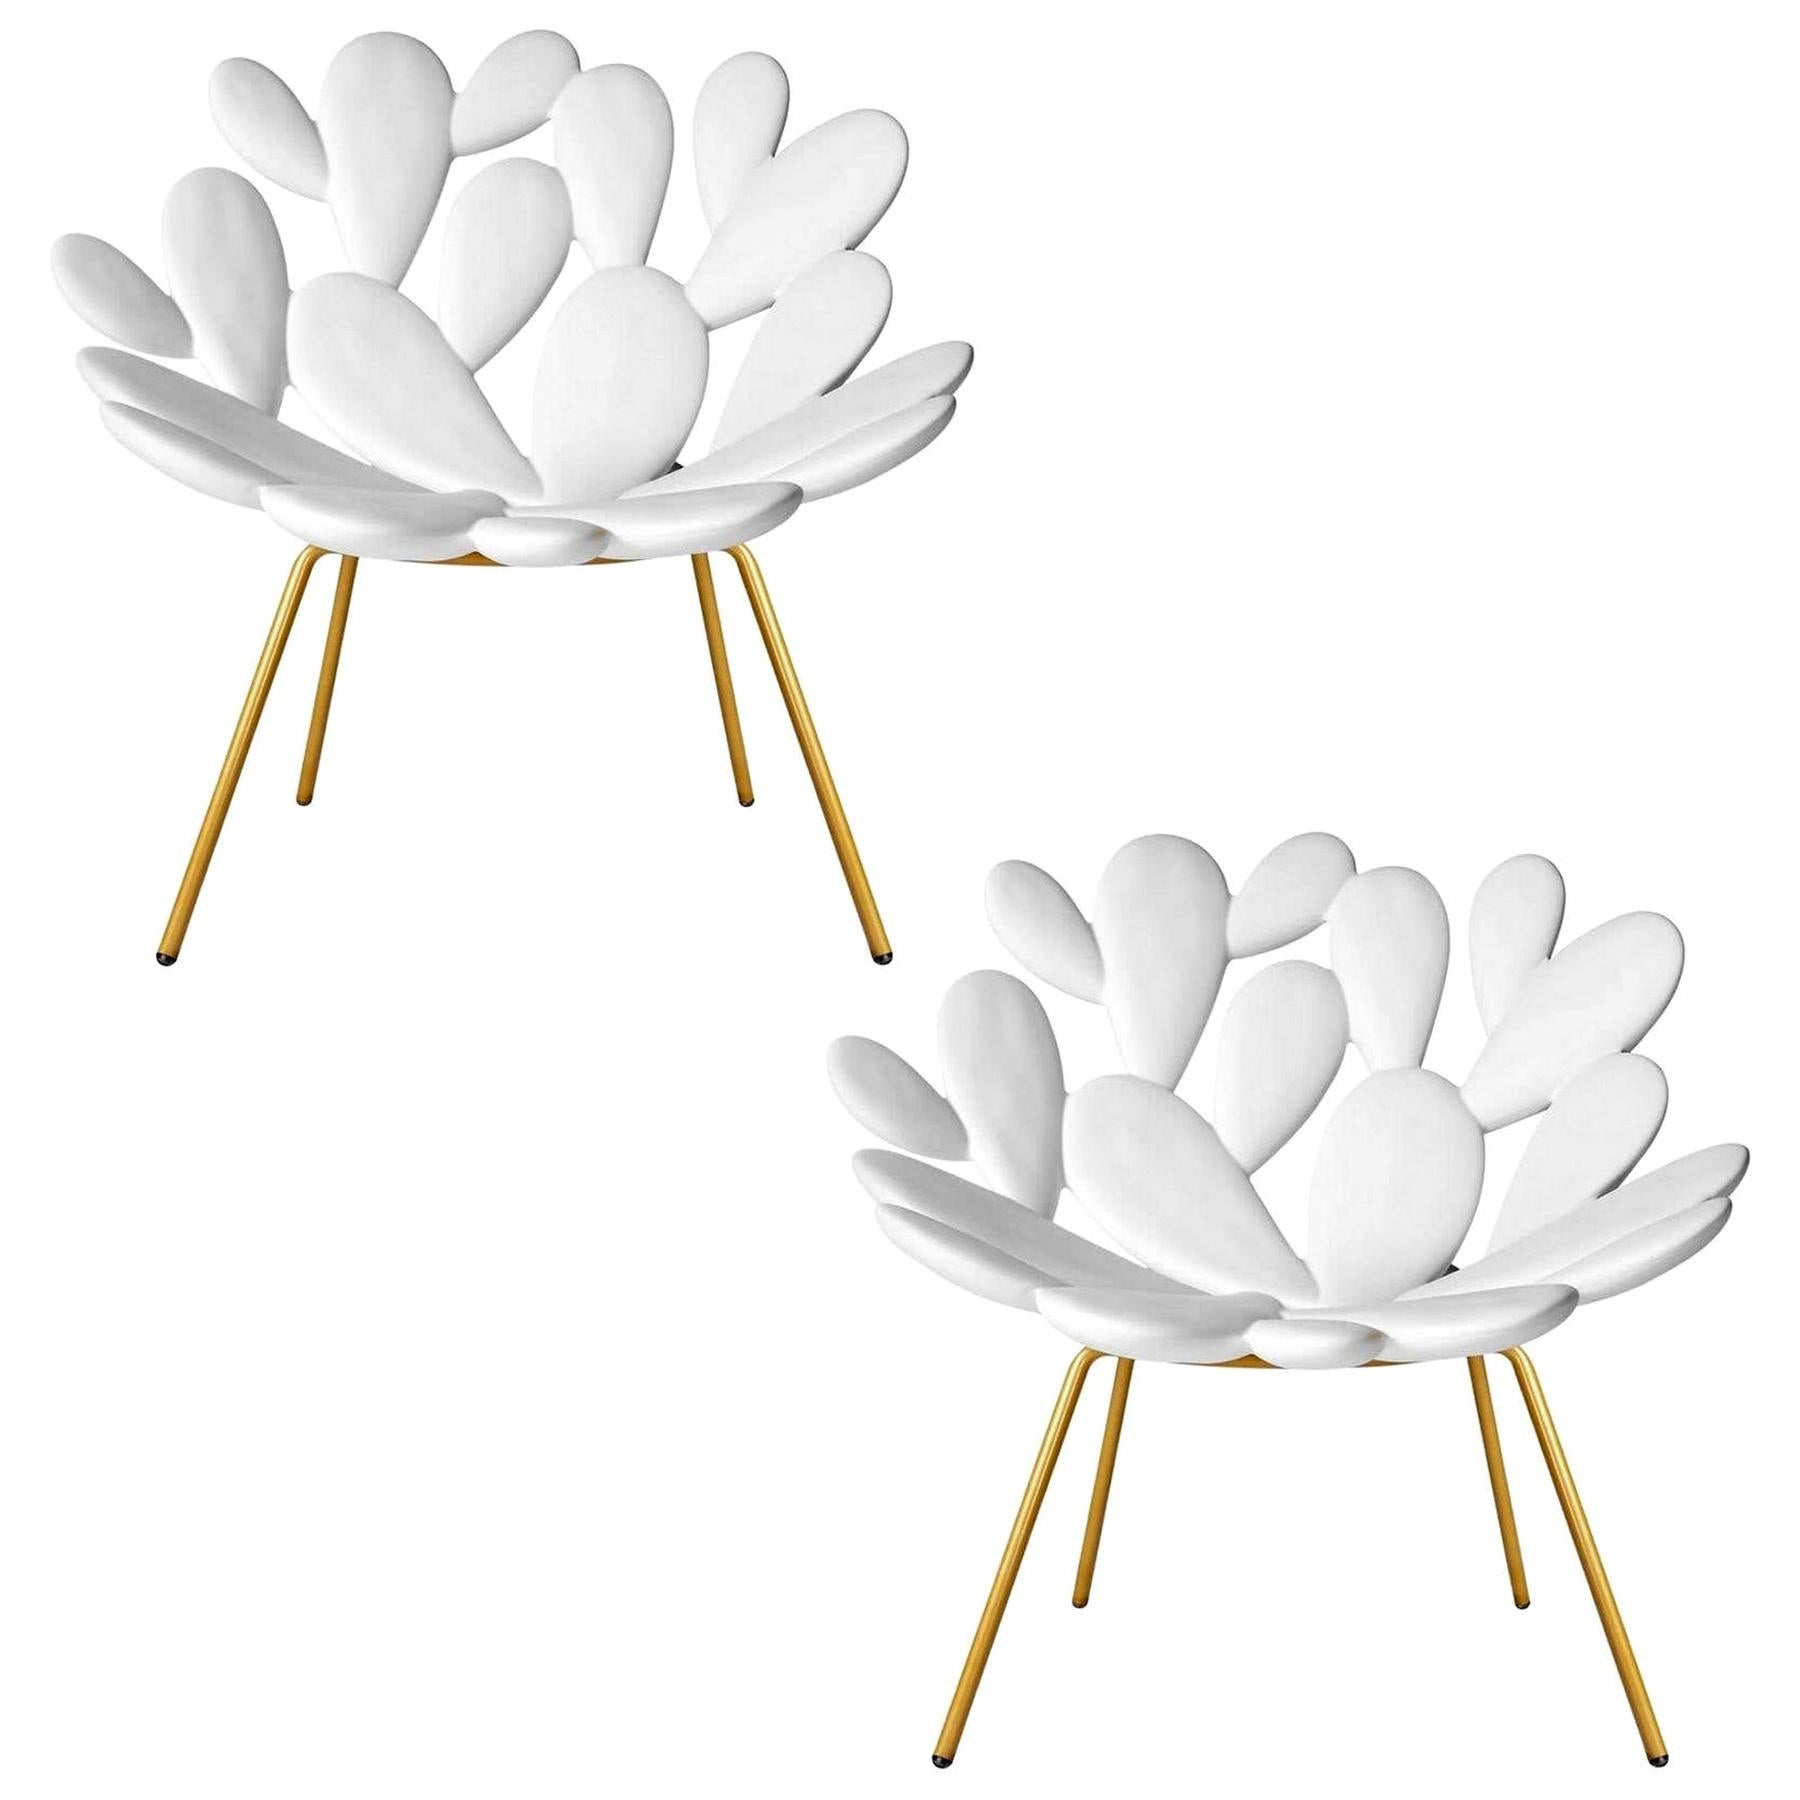 In Stock in Los Angeles, Set of 2 White and Brass Outdoor Cactus Chairs